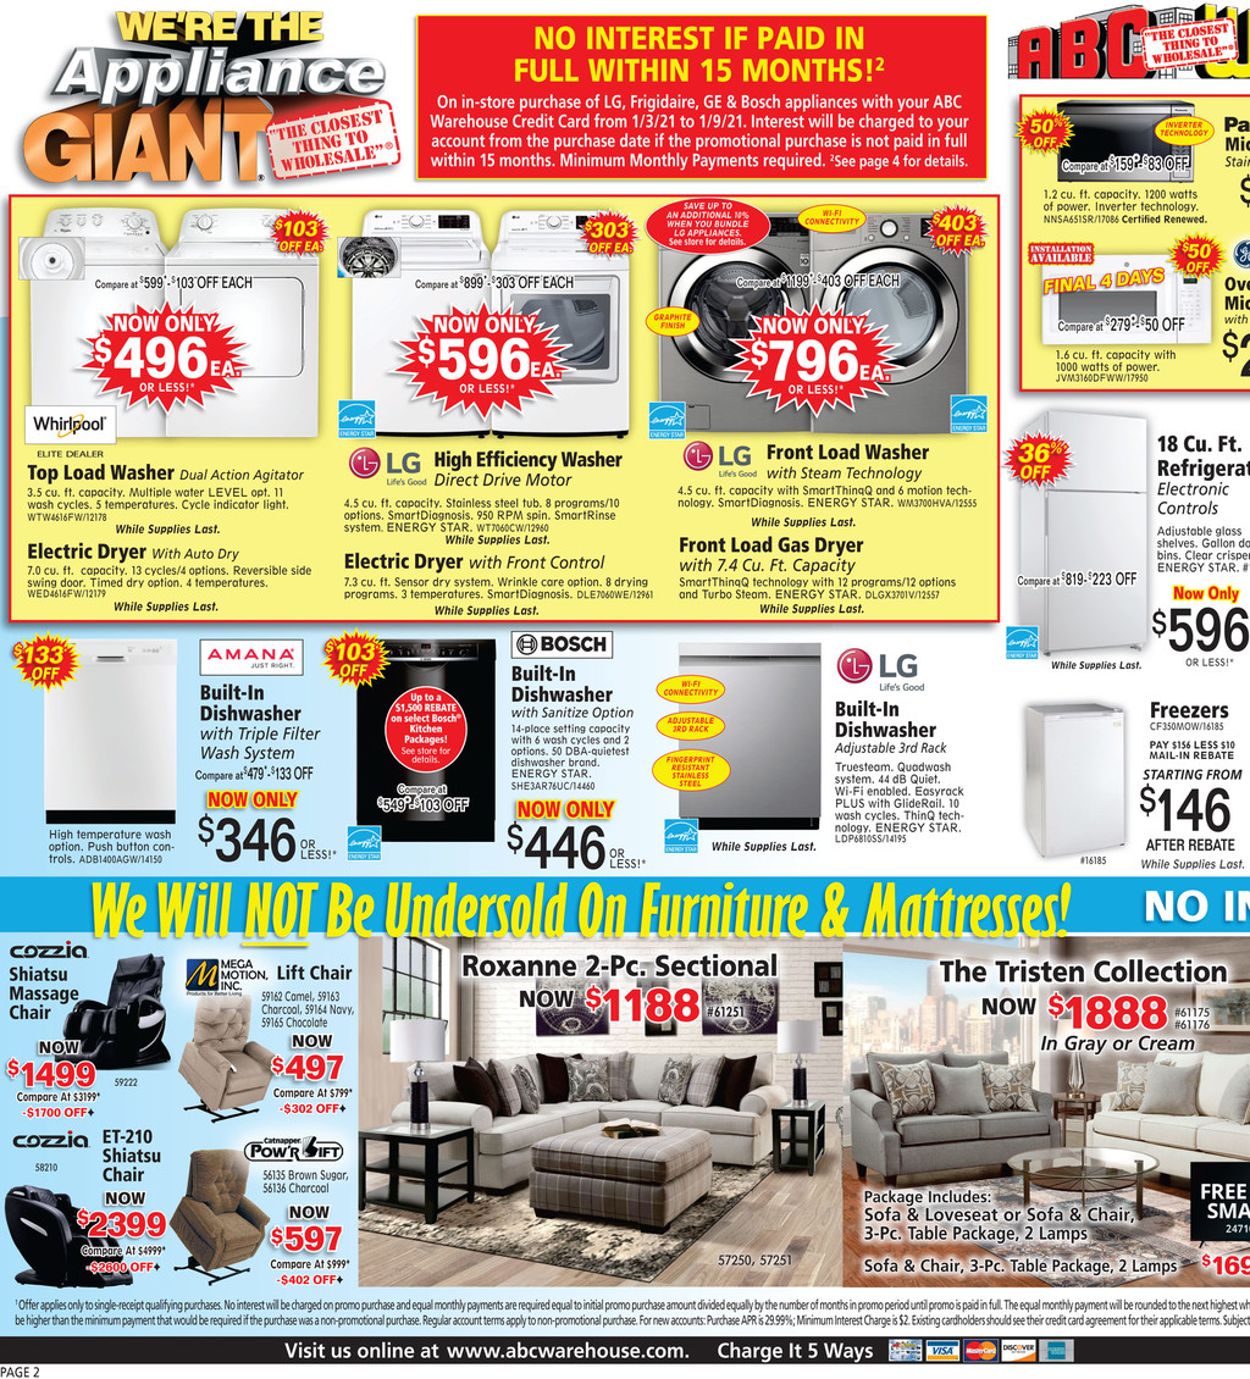 ABC Warehouse Winter Clearance 2021 Weekly Ad Circular - valid 01/03-01/09/2021 (Page 2)